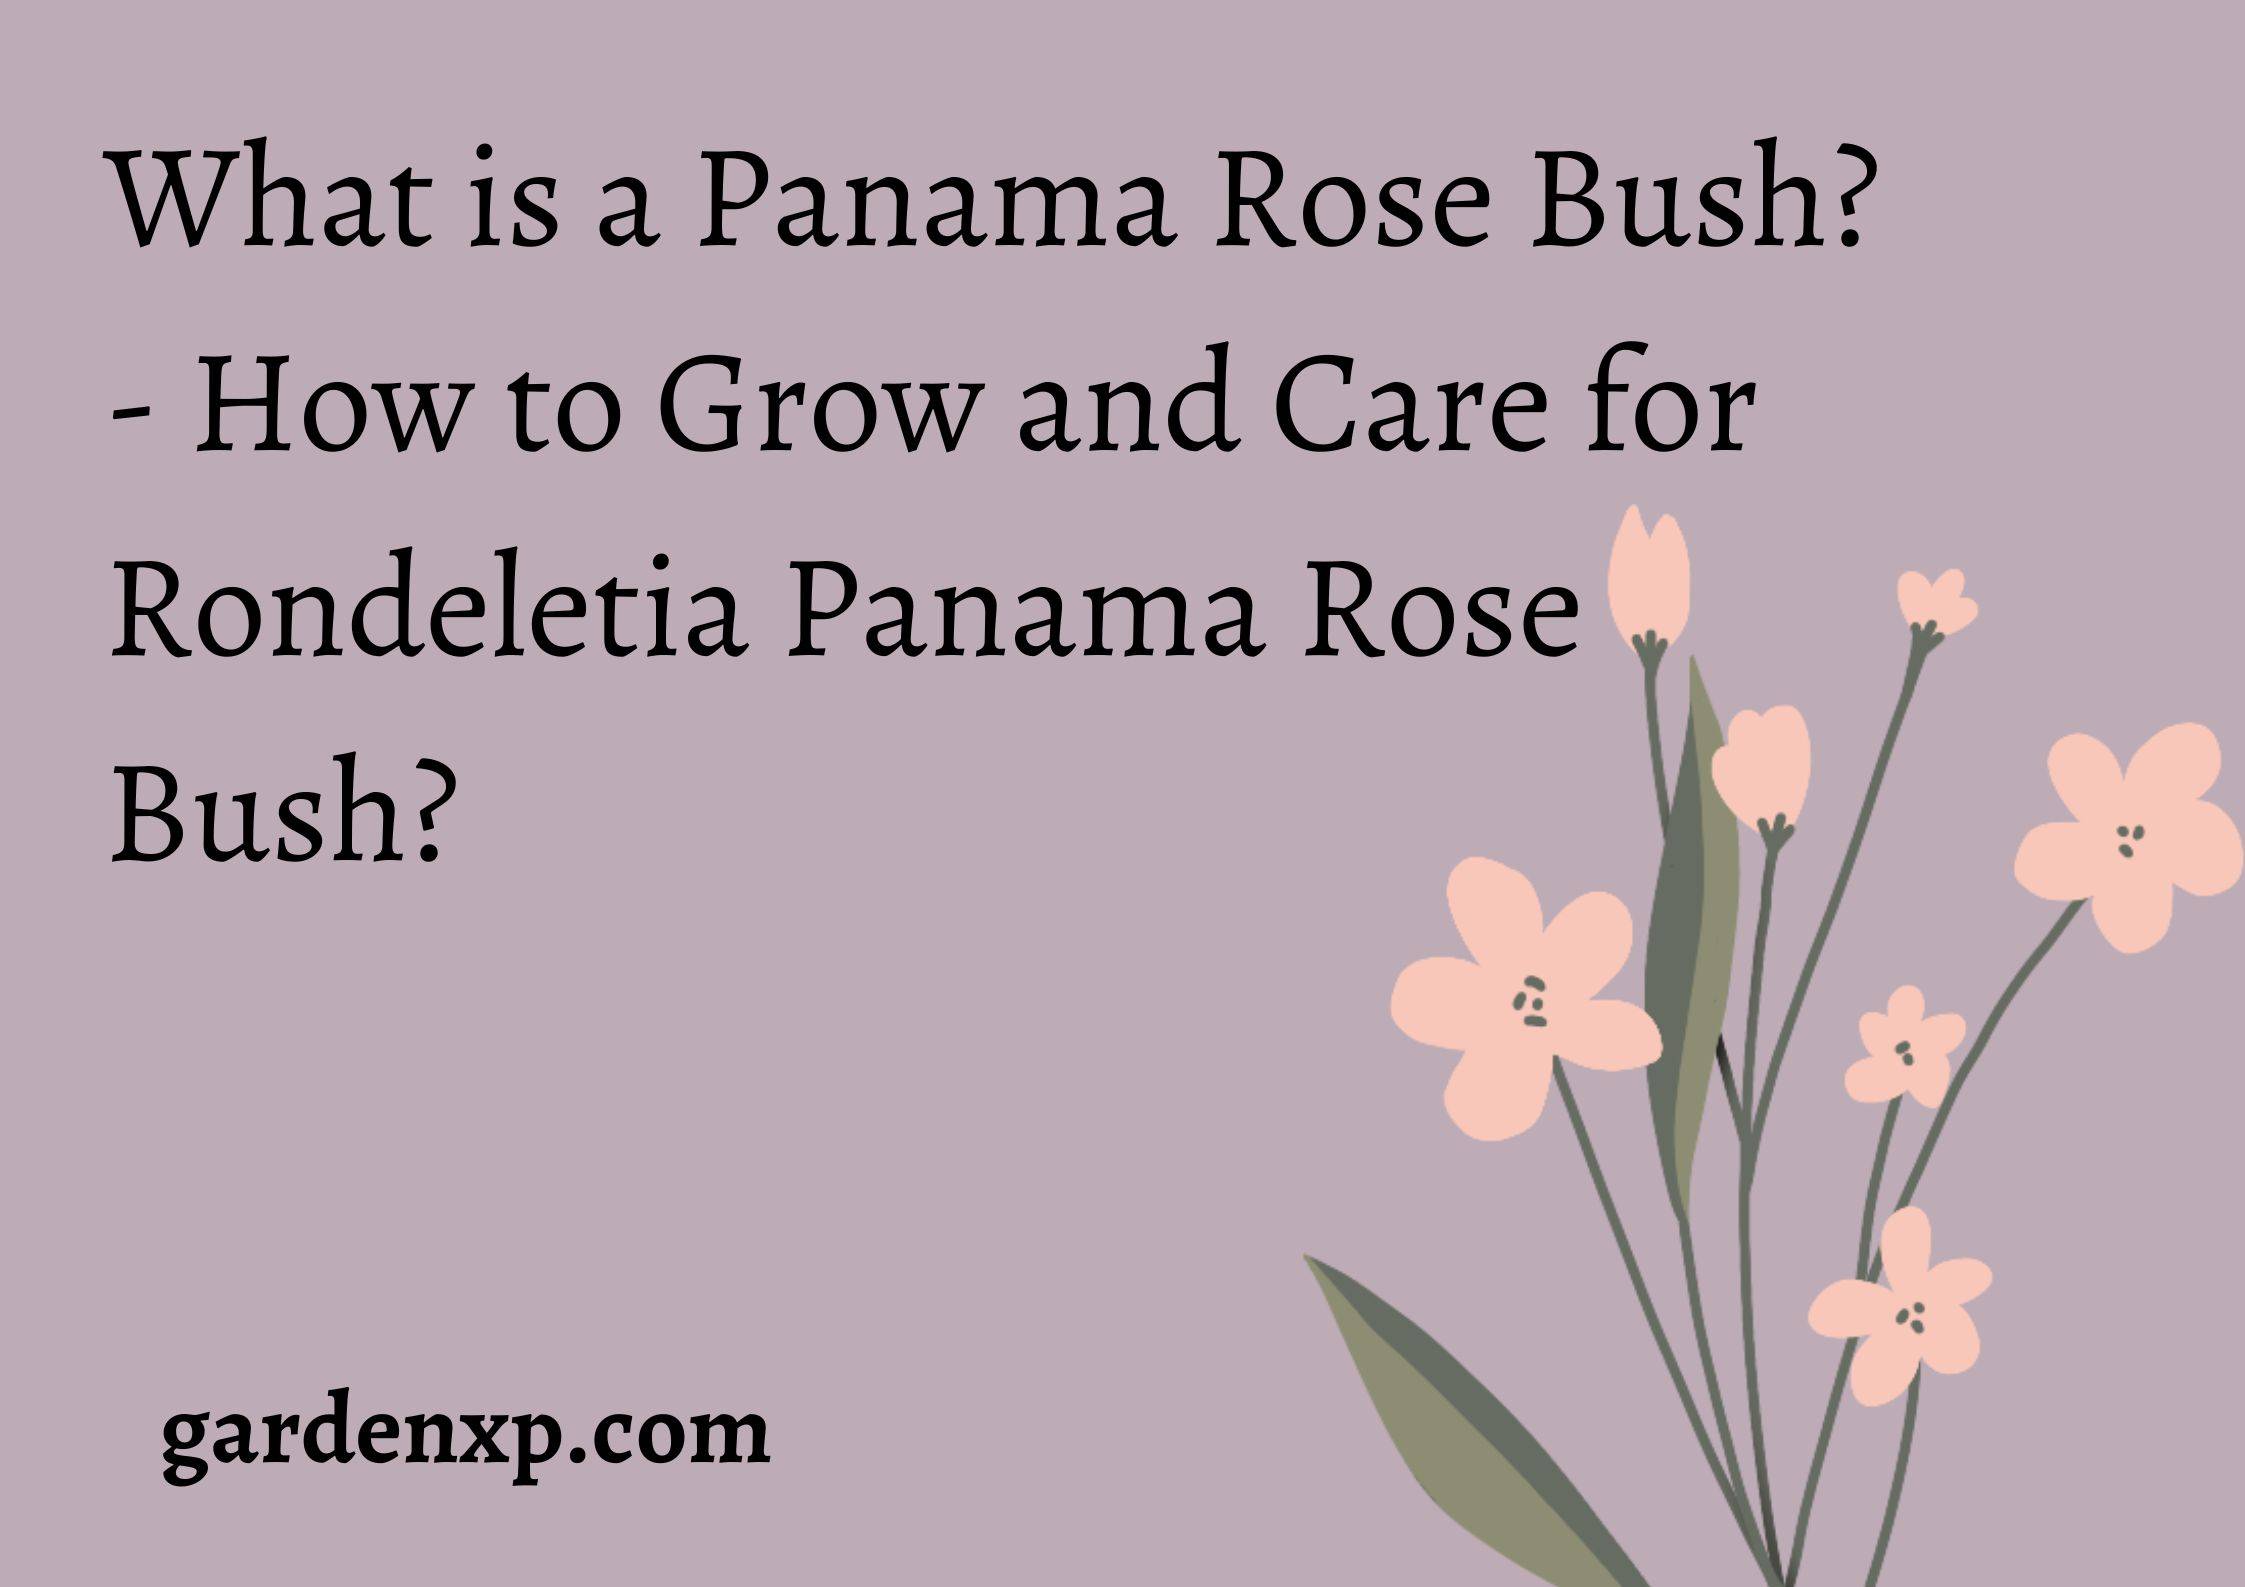 Panama Roses - Grow and Care tips for Panama Rose Flower